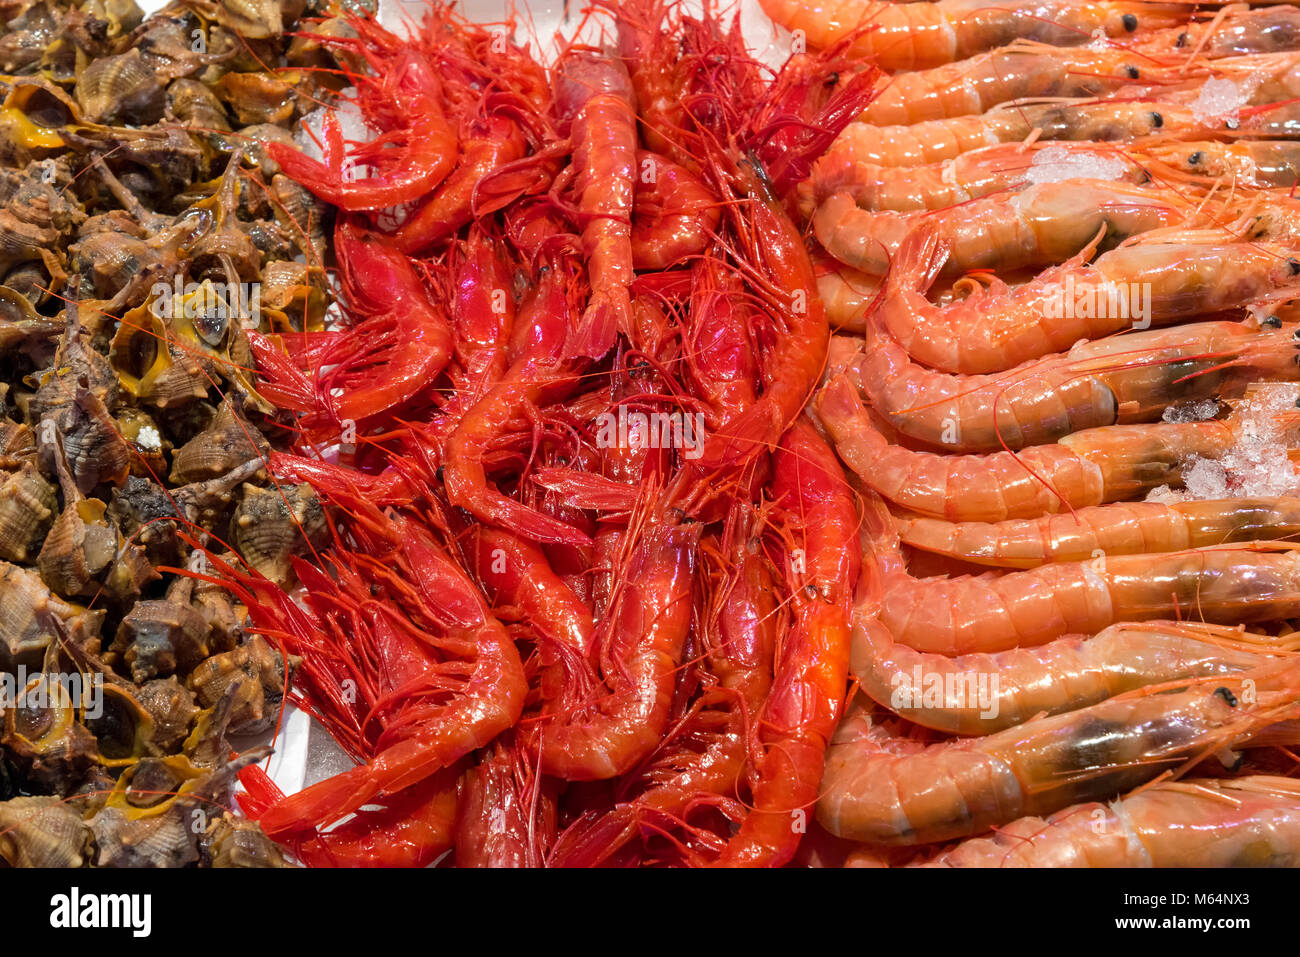 Prawns and mussels for sale at a market in Madrid, Spain Stock Photo